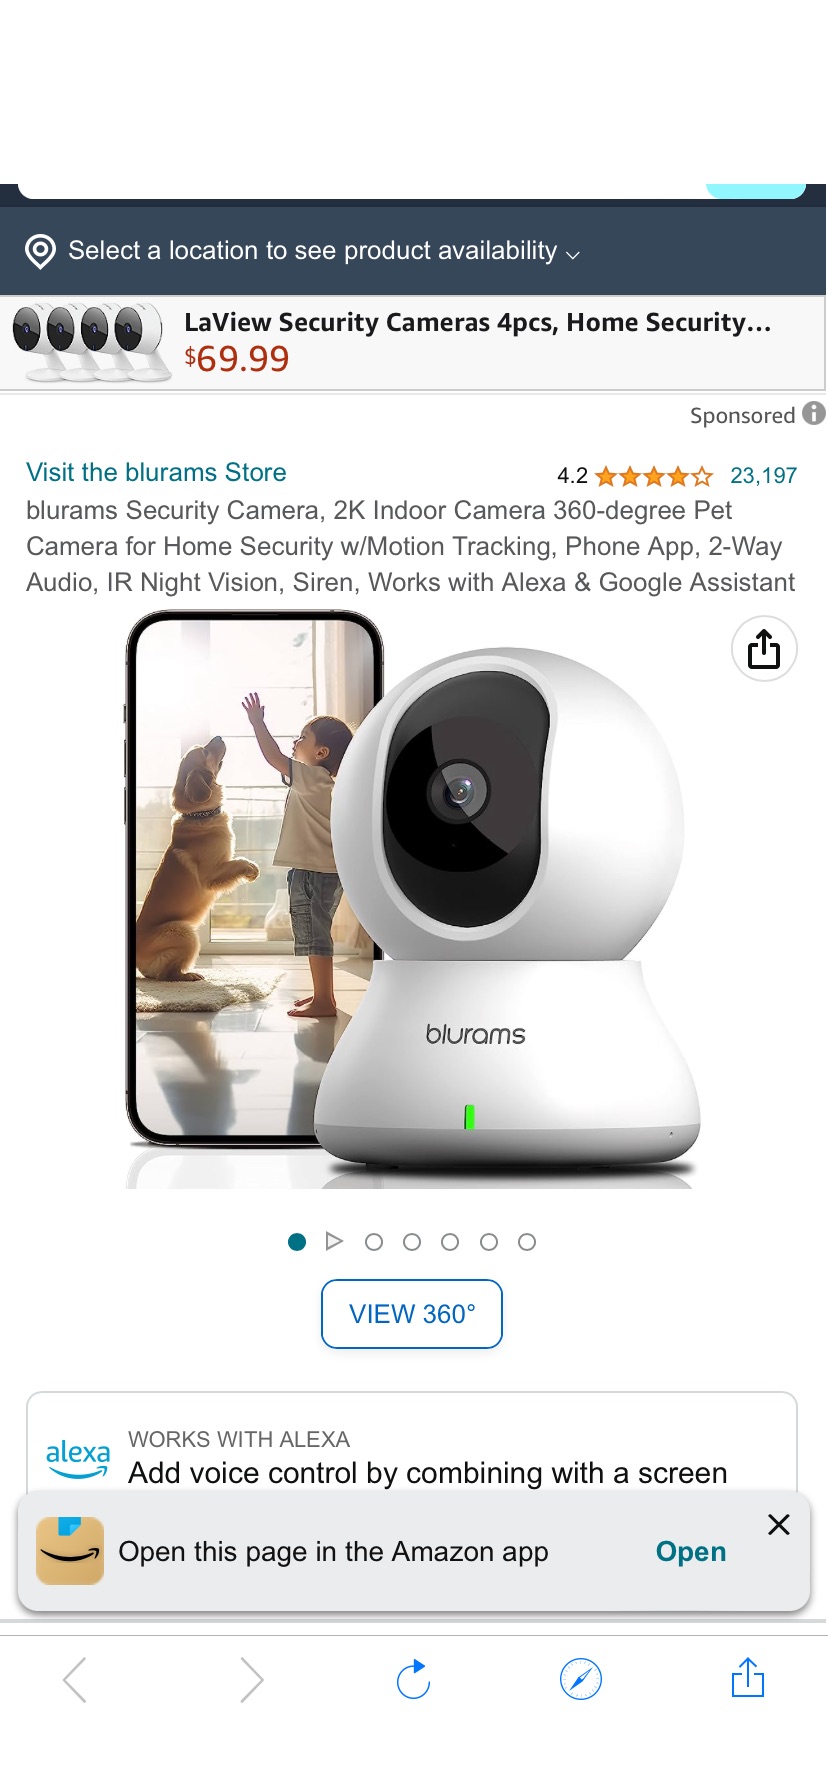 Amazon.com: blurams Security Camera, 2K Indoor Camera 360-degree Pet Camera for Home Security w/Motion Tracking, Phone App, 2-Way Audio, IR Night Vision, Siren, Works with Alexa & Google Assistant : Electronics